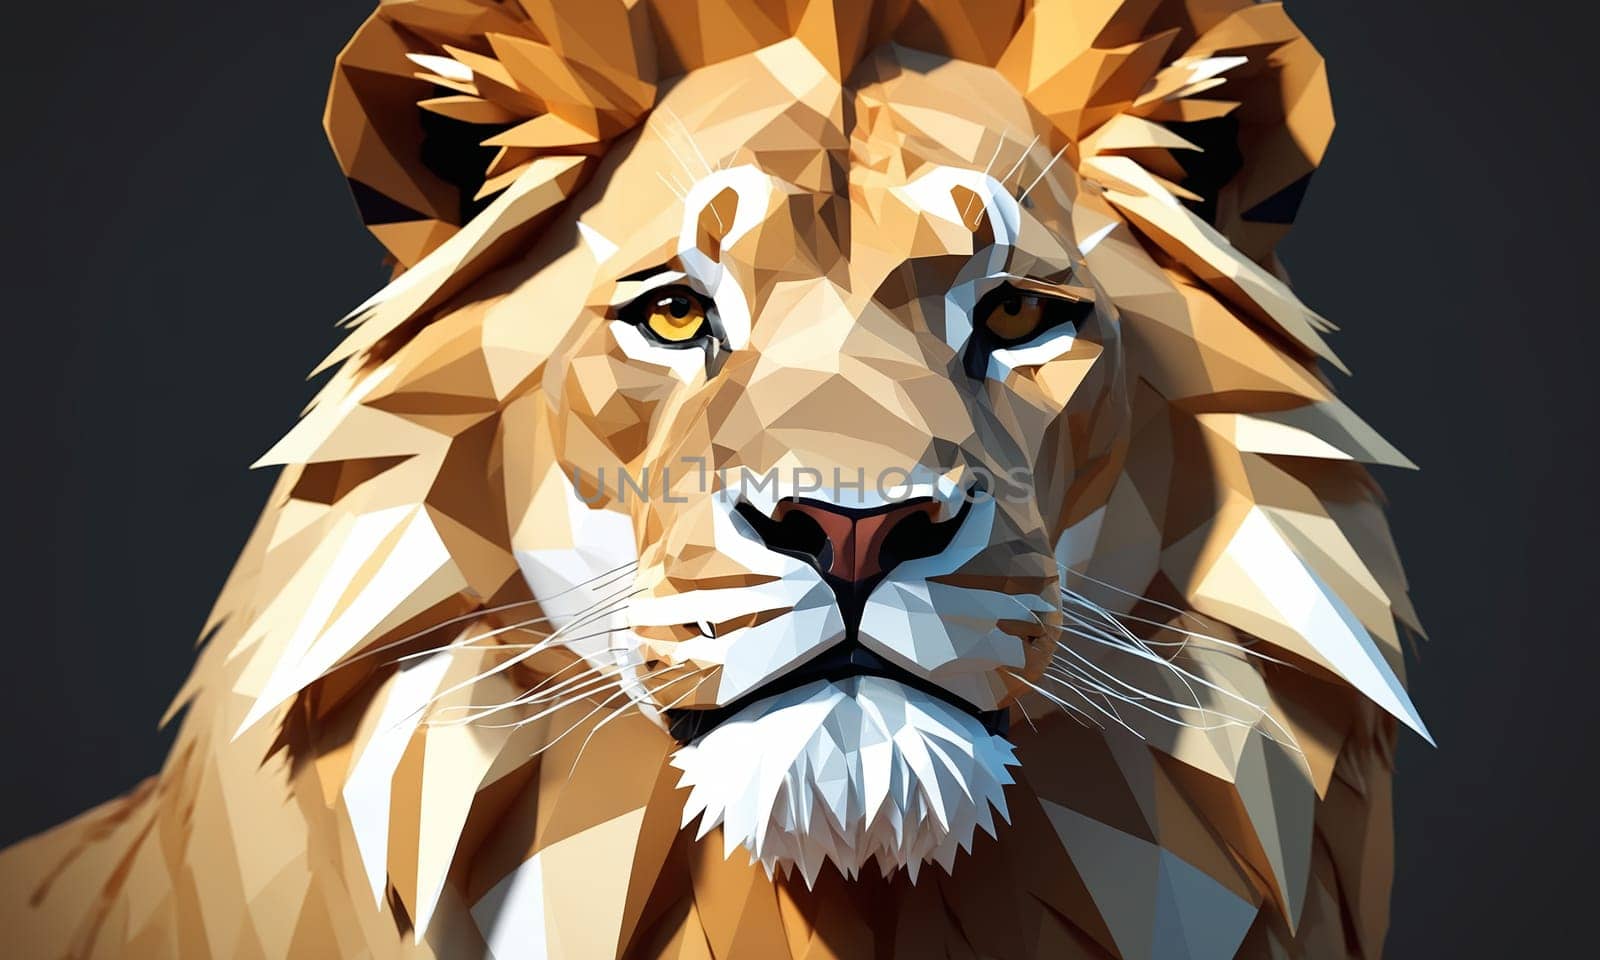 A low poly illustration of a lion, a member of the Felidae family and one of the Big cats. The artwork features detailed Whiskers, a Snout, and a Terrestrial animal on a gray background